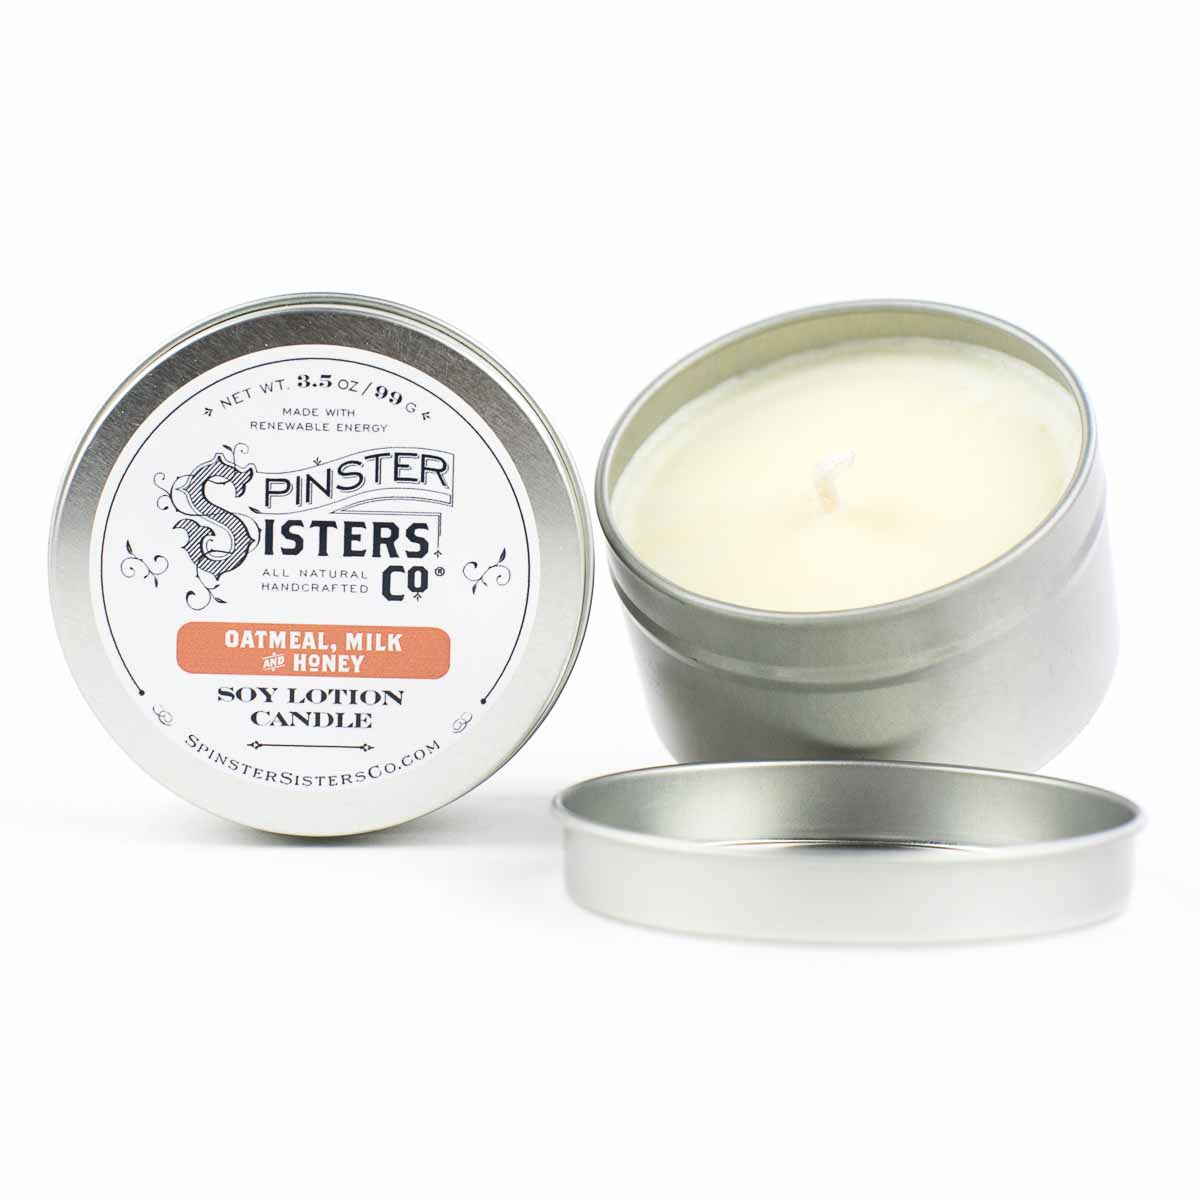 Spinster Sisters Soy Lotion Candle - Oatmeal, Milk and Honey